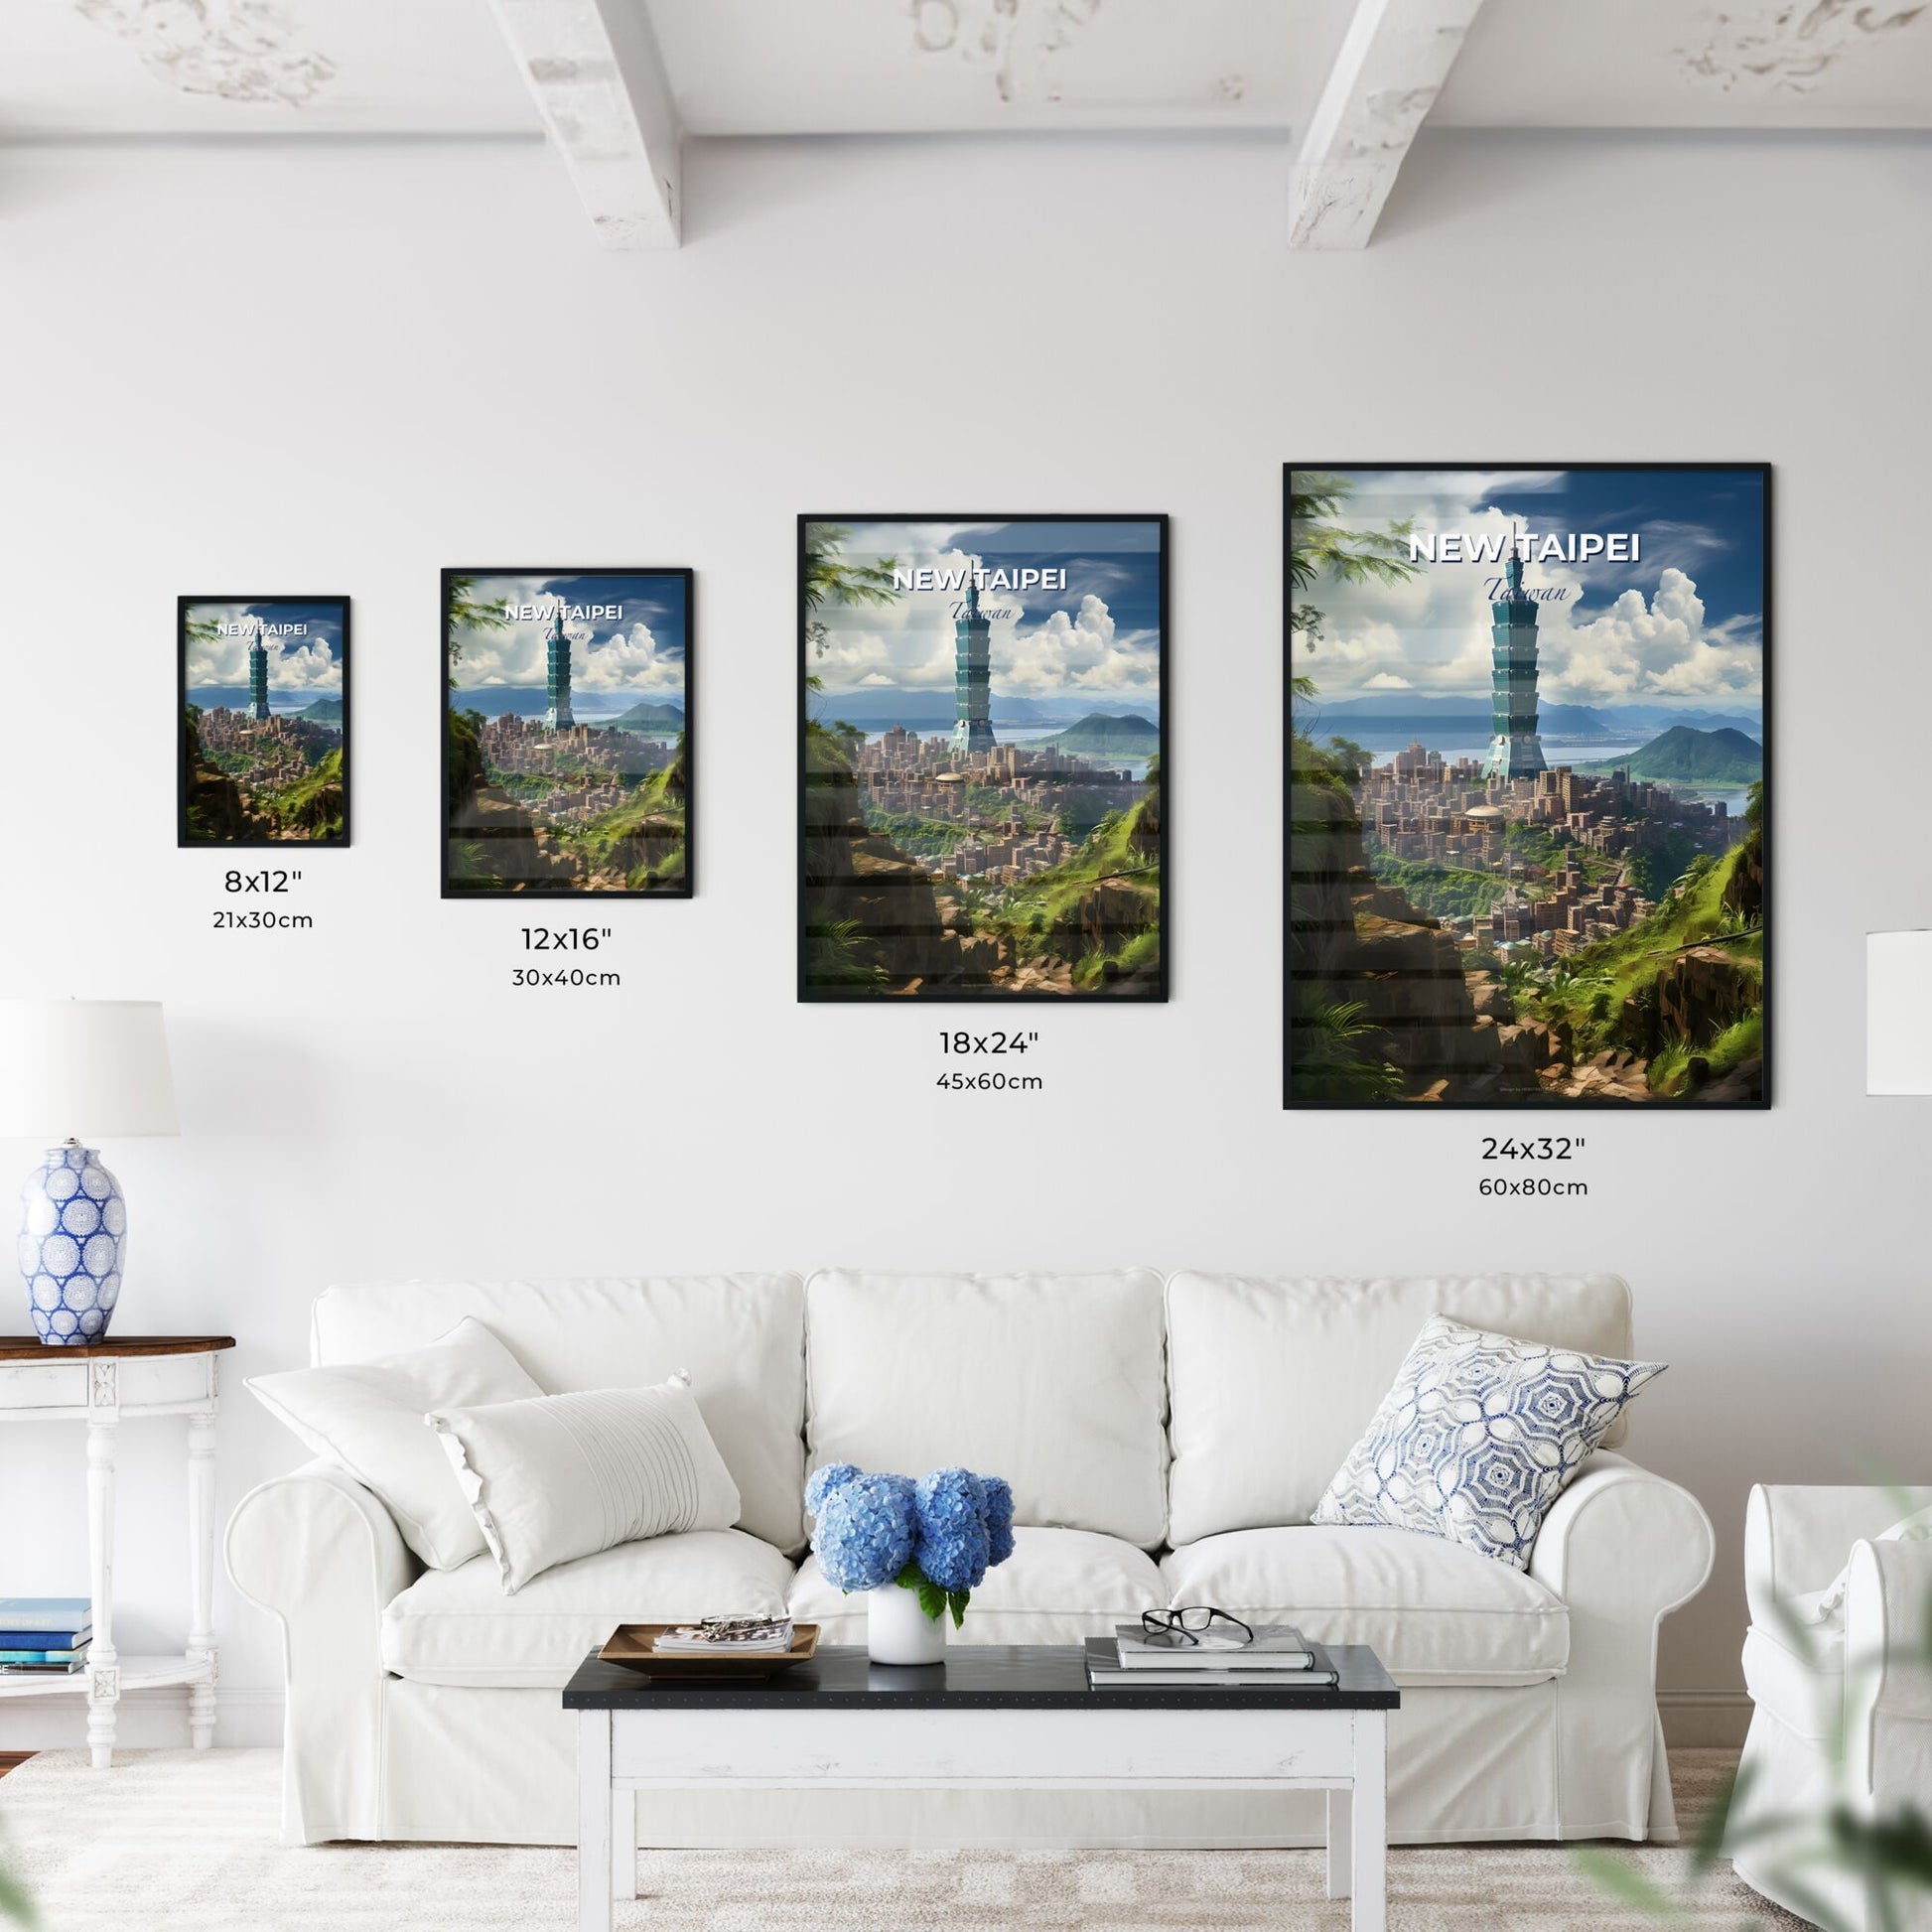 New Taipei Taiwan Skyline - Modern City Landscape Painting with Vibrant Colors and Bold Brushstrokes Default Title